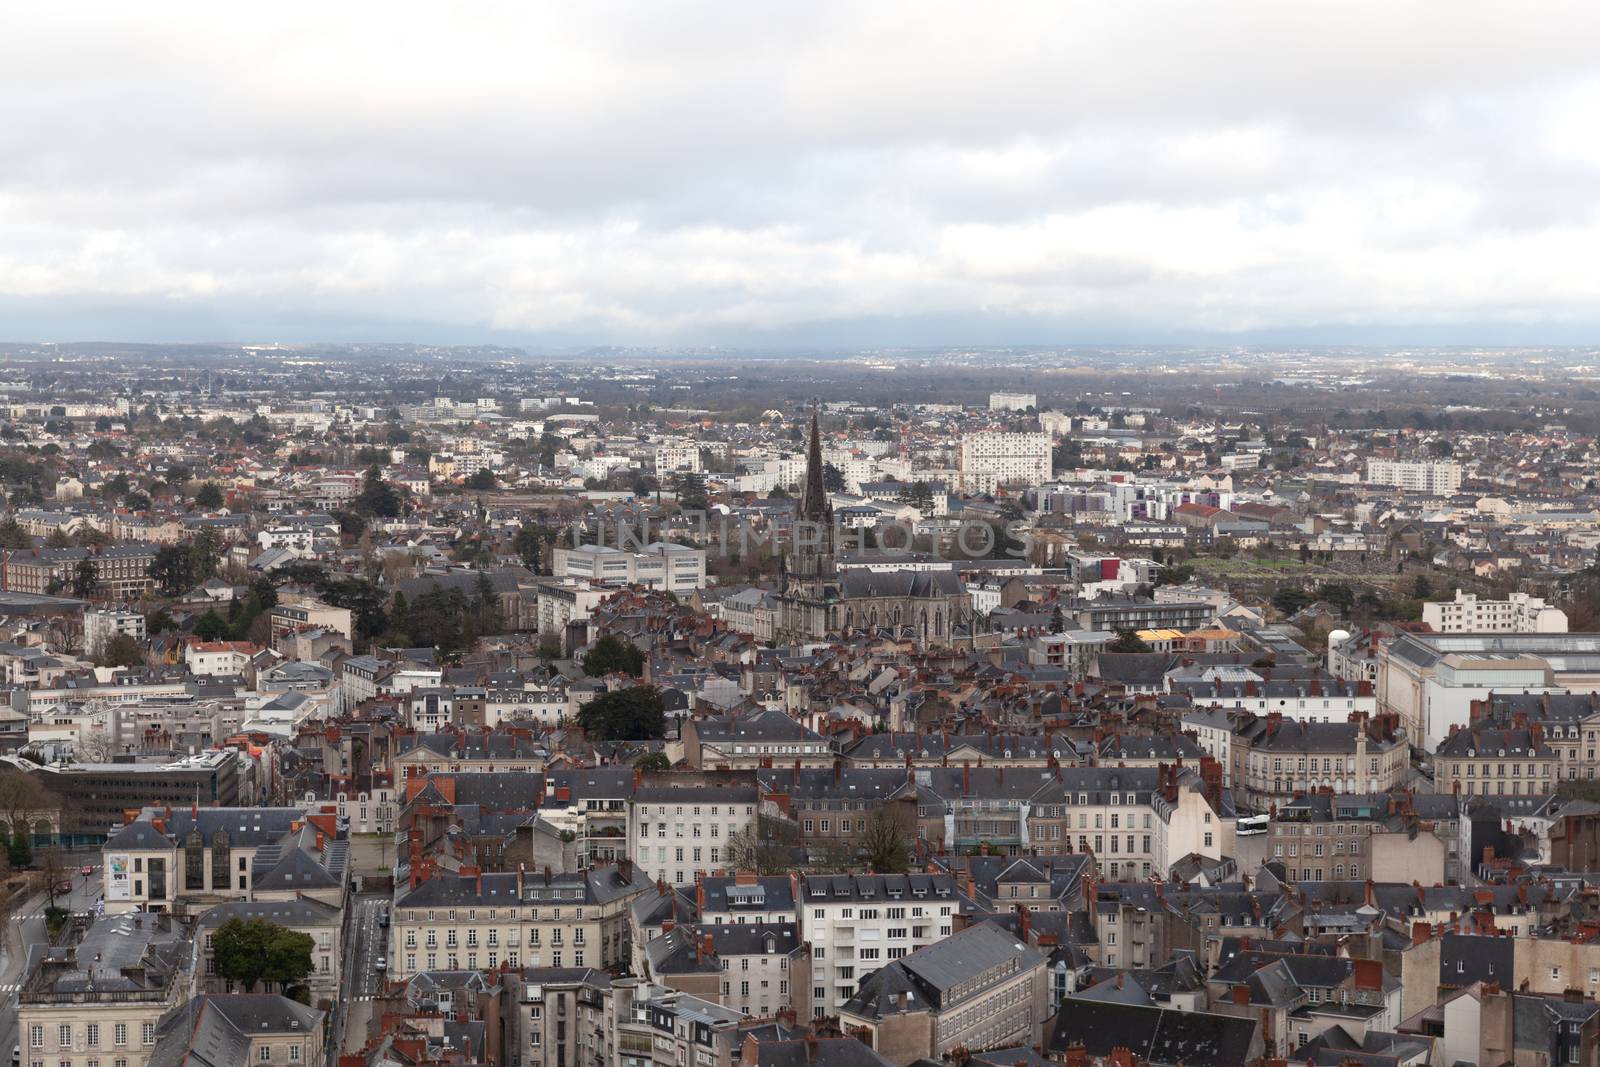 Nantes, France: 22 February 2020: Aerial view of Nantes showing Saint-Clement